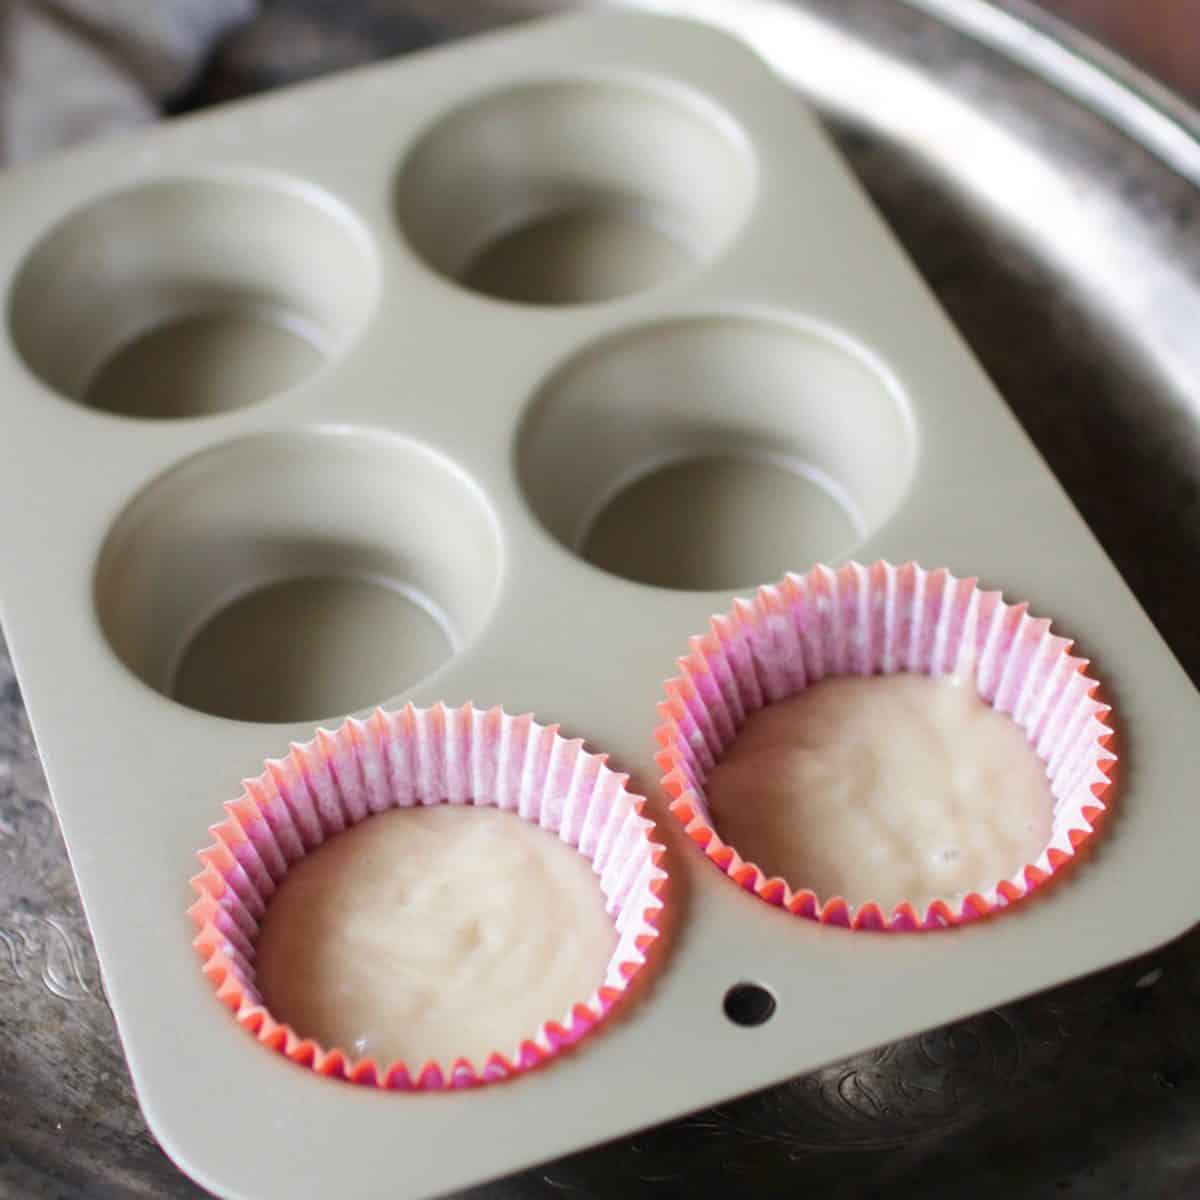 Two unbaked cupcakes in a cupcake tin.